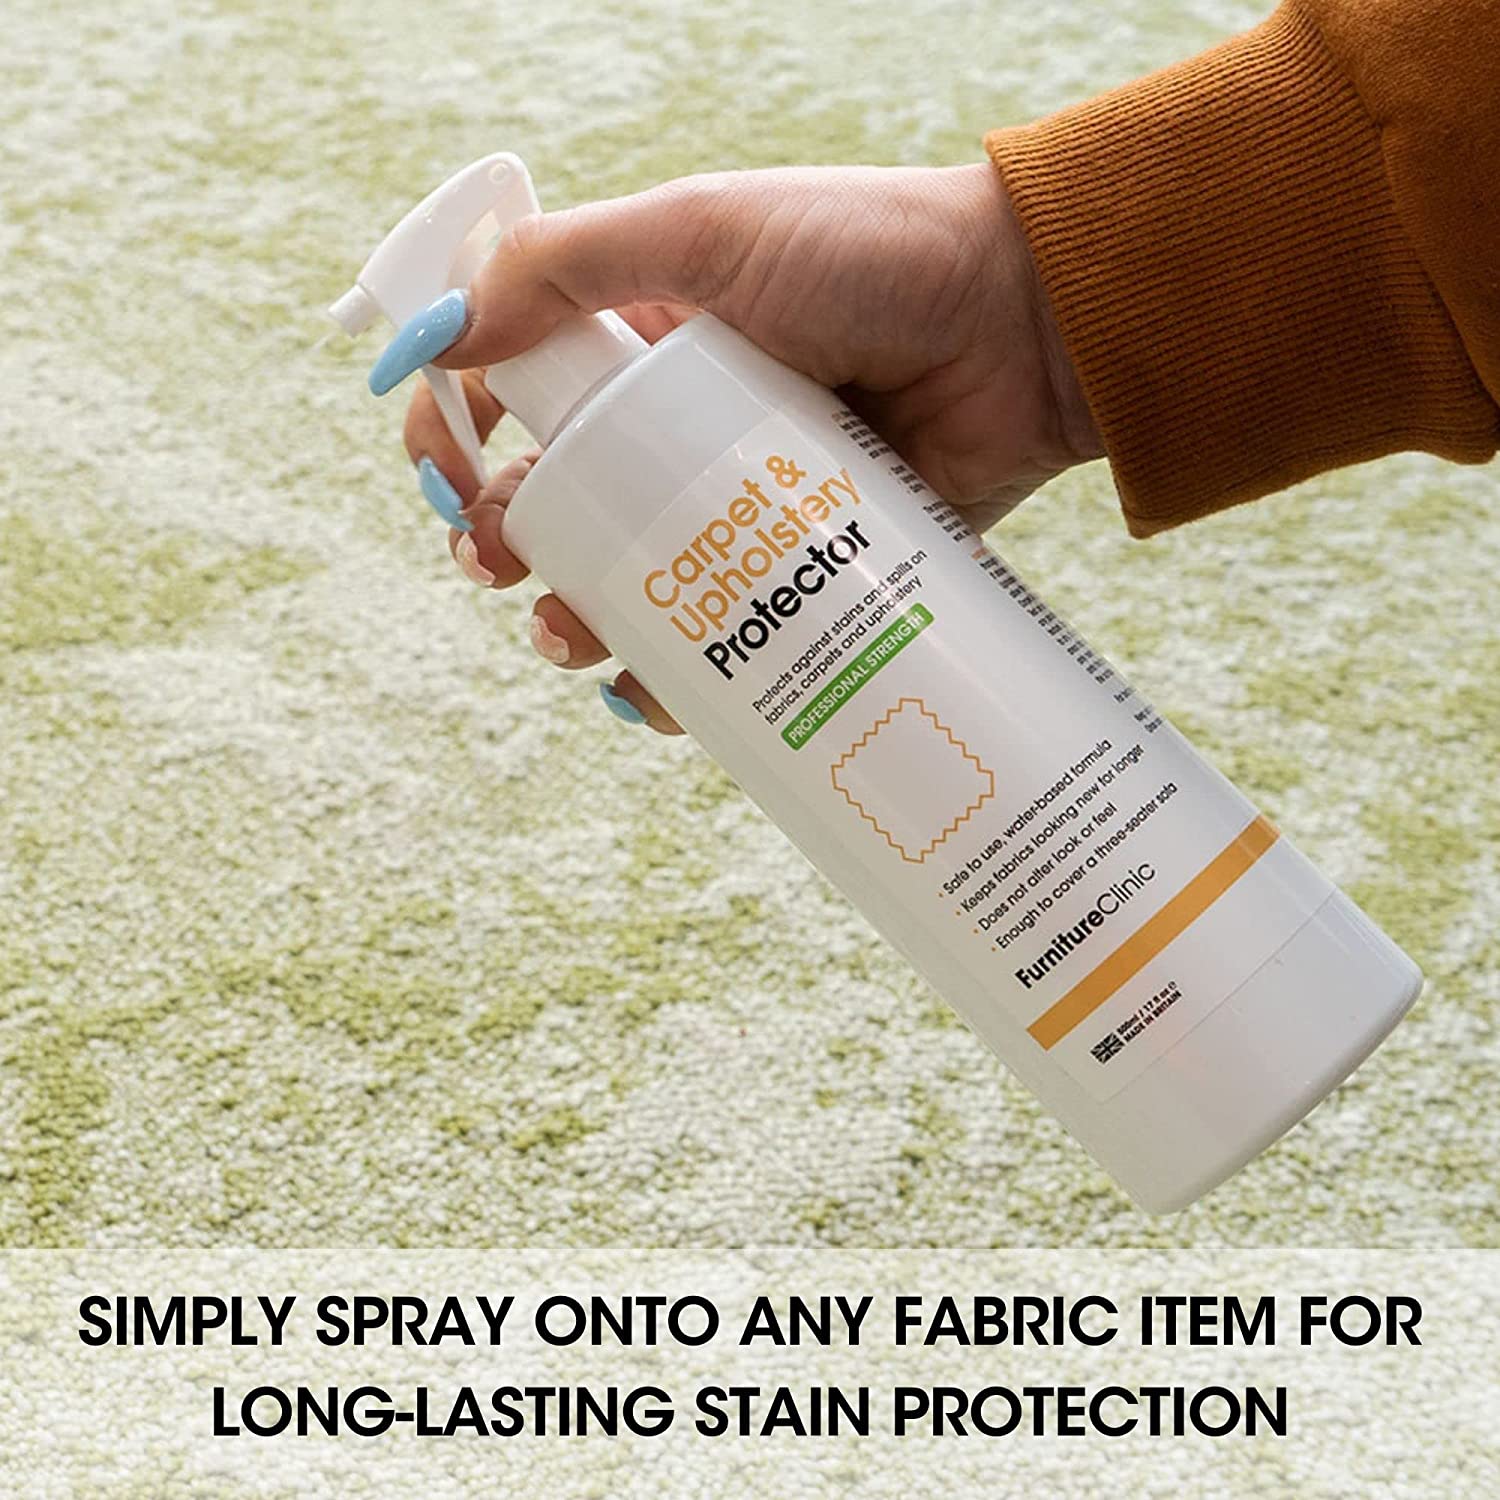 Buy Furniture ClinicCarpet & Upholstery Protector Spray - Repels